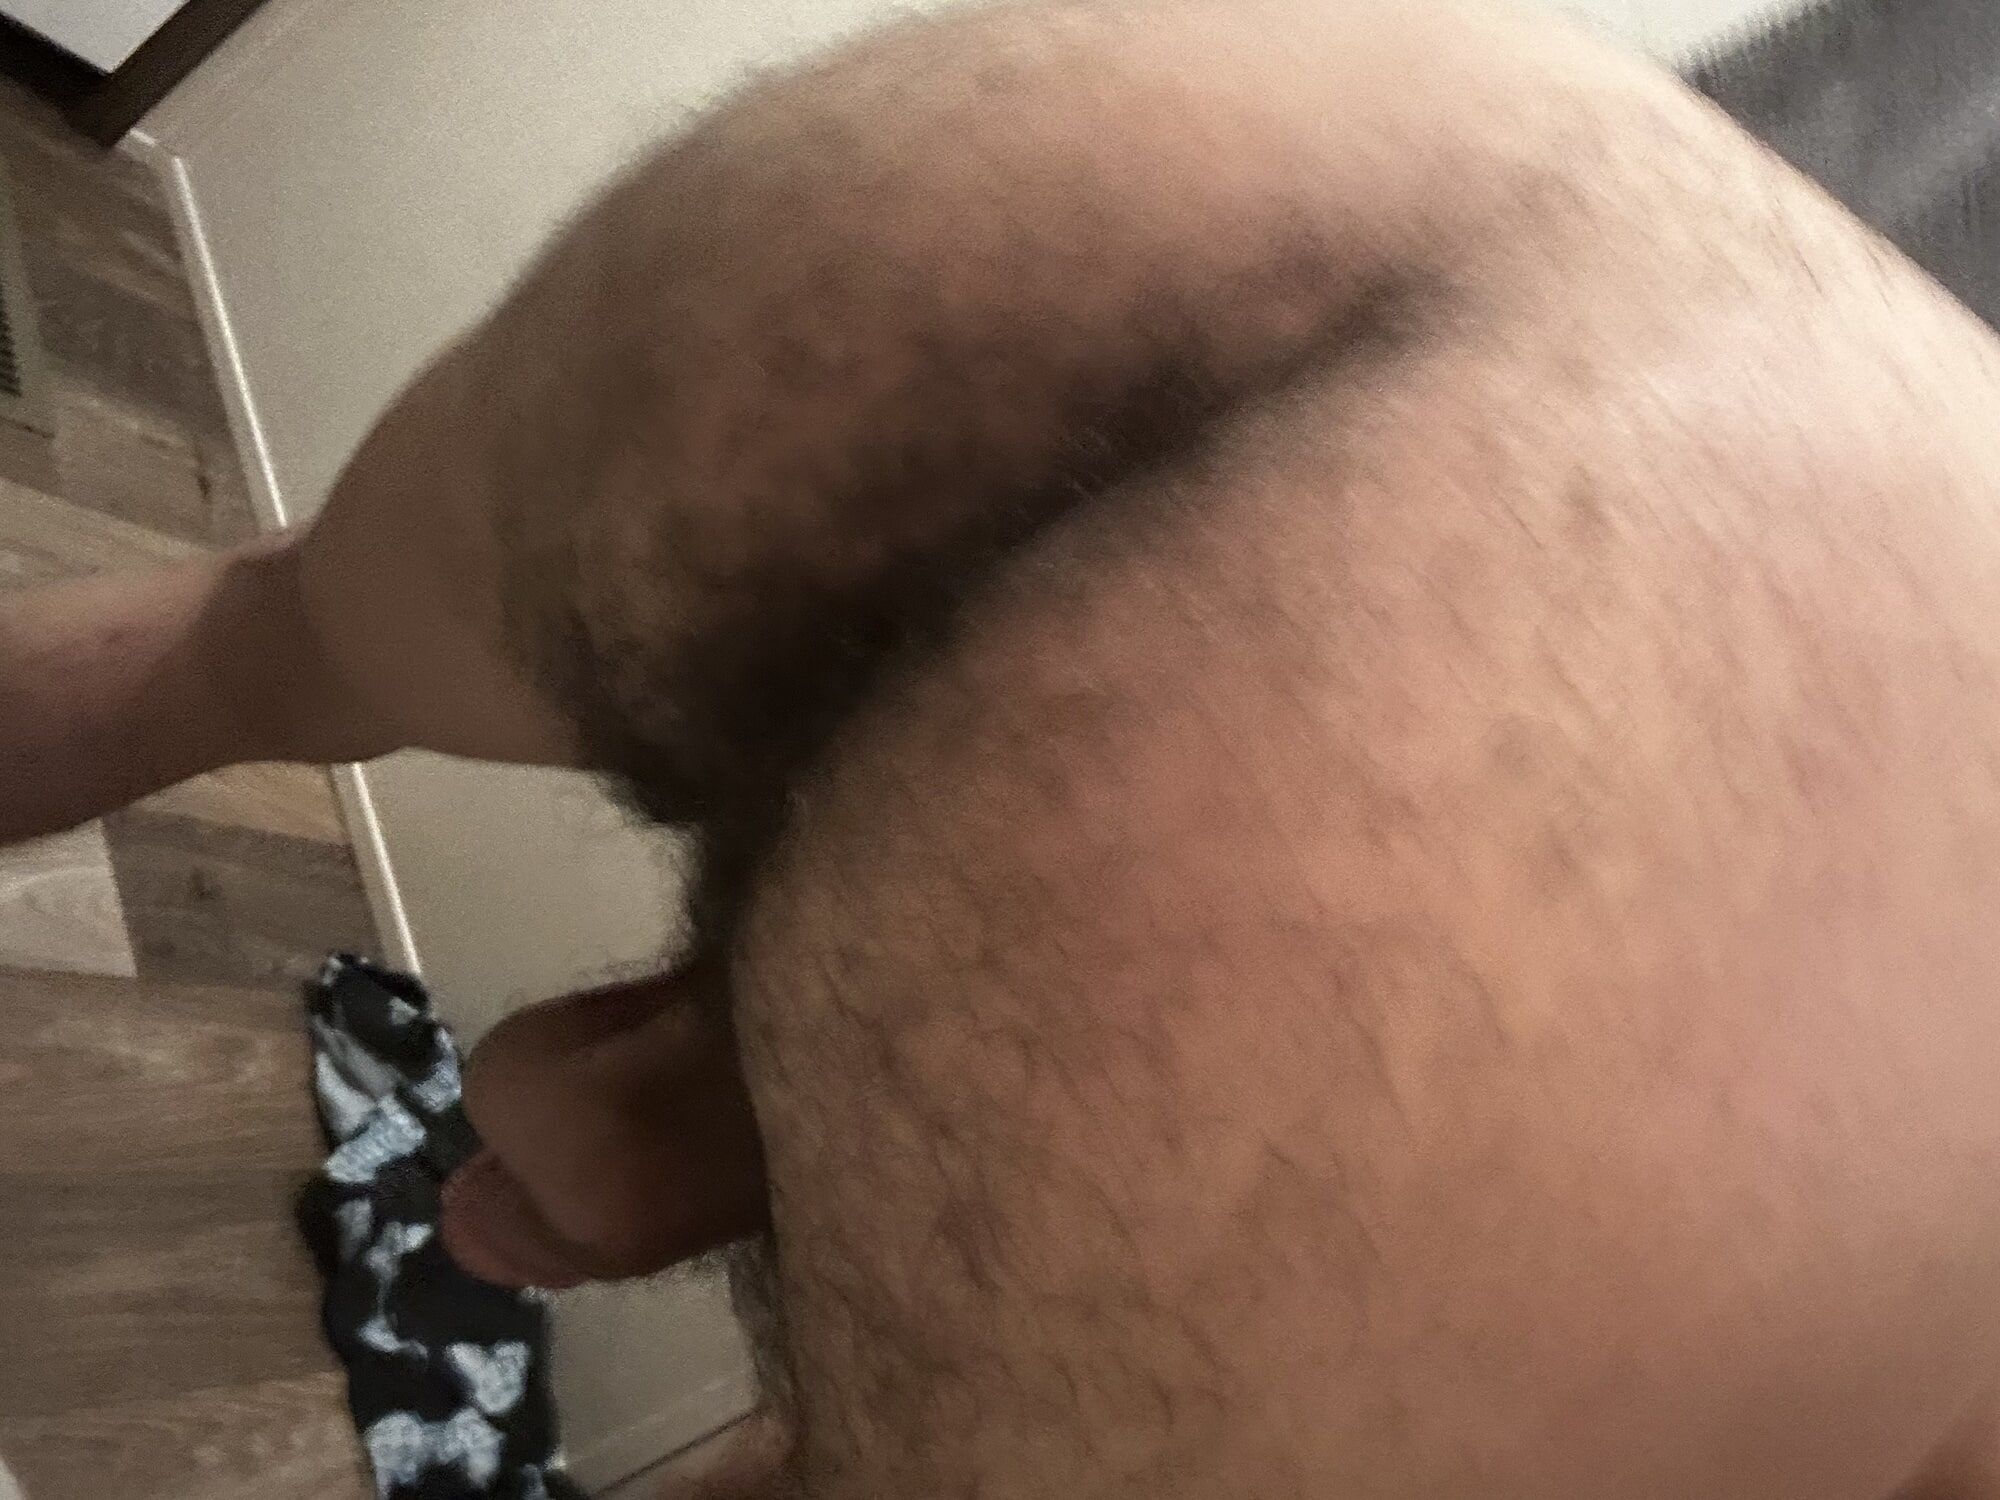 Big Fat Hairy Virgin Ass Ready to be Smacked and eaten